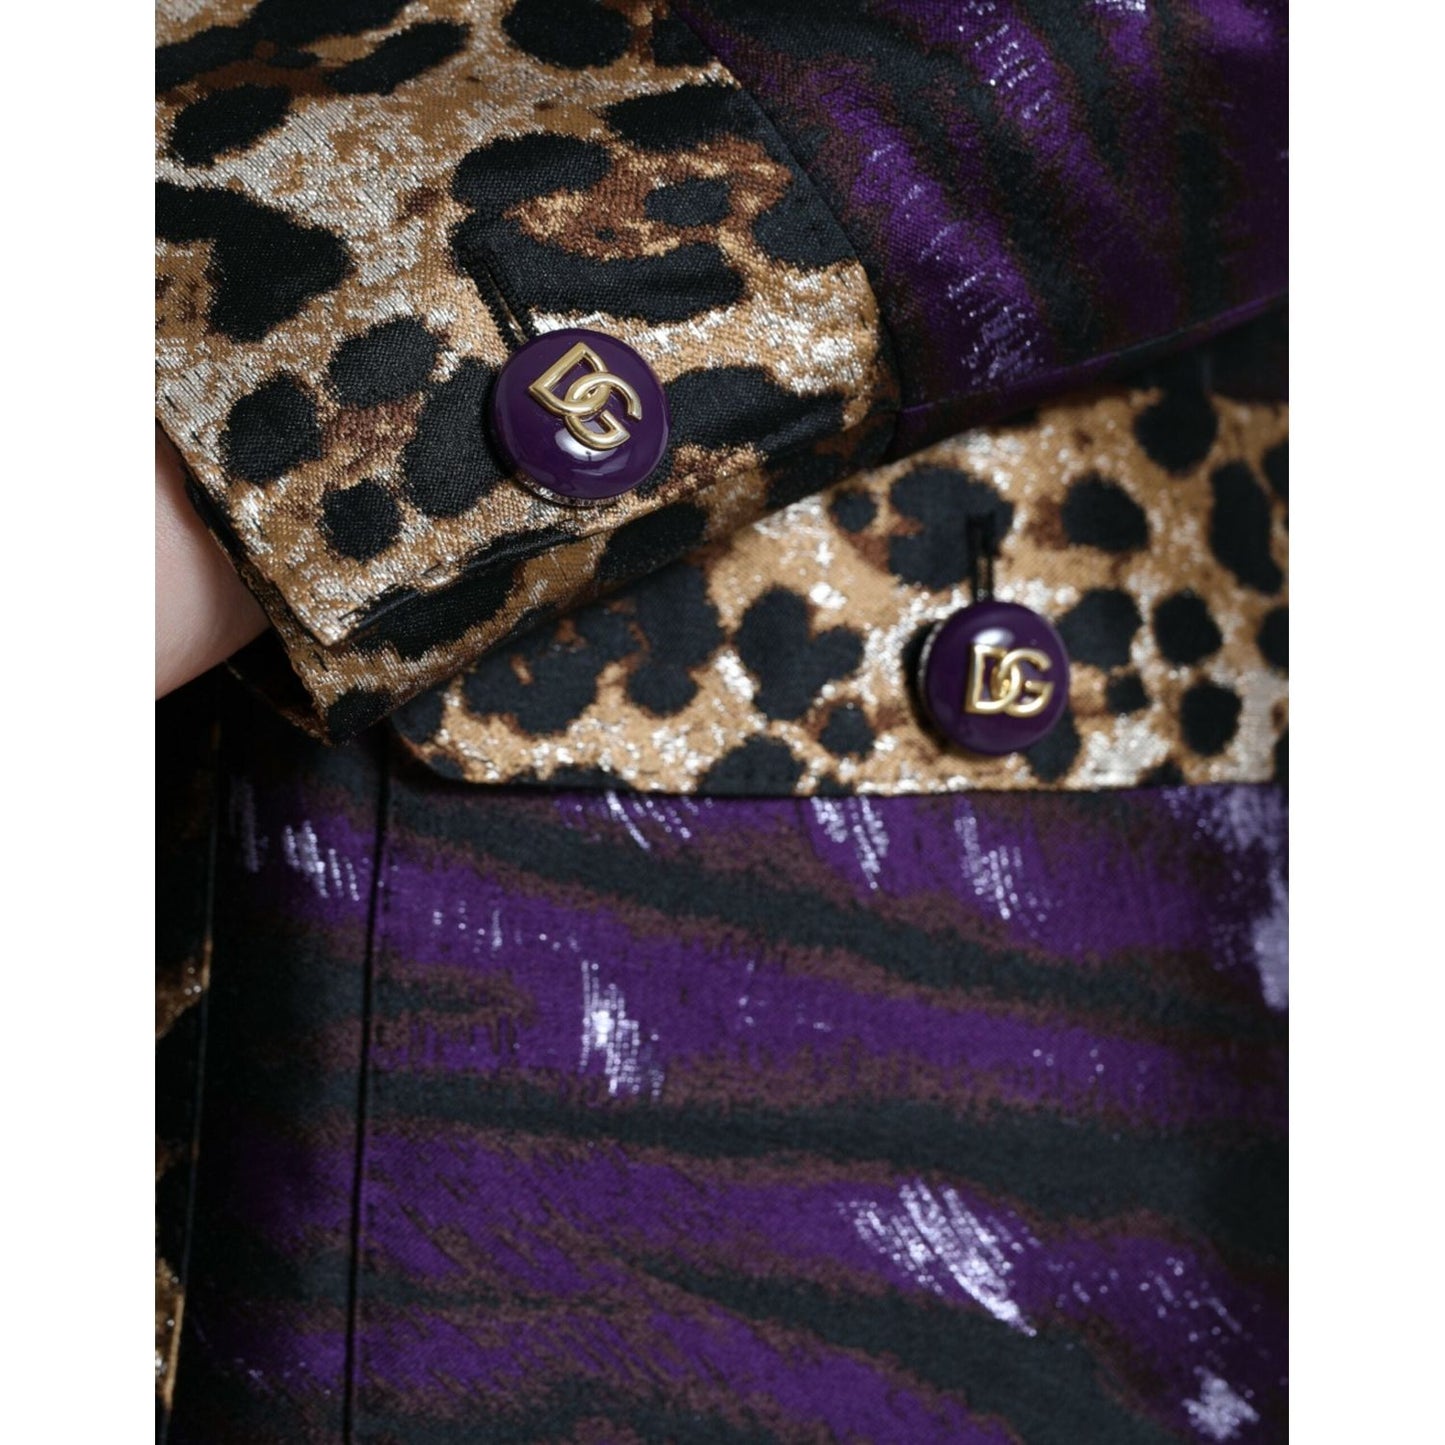 Dolce & Gabbana Exquisite Jacquard Trench With Tiger Motif purple-lame-jacquard-tiger-print-coat-jacket 465A8999-BG-scaled-74a1f440-fc5.jpg